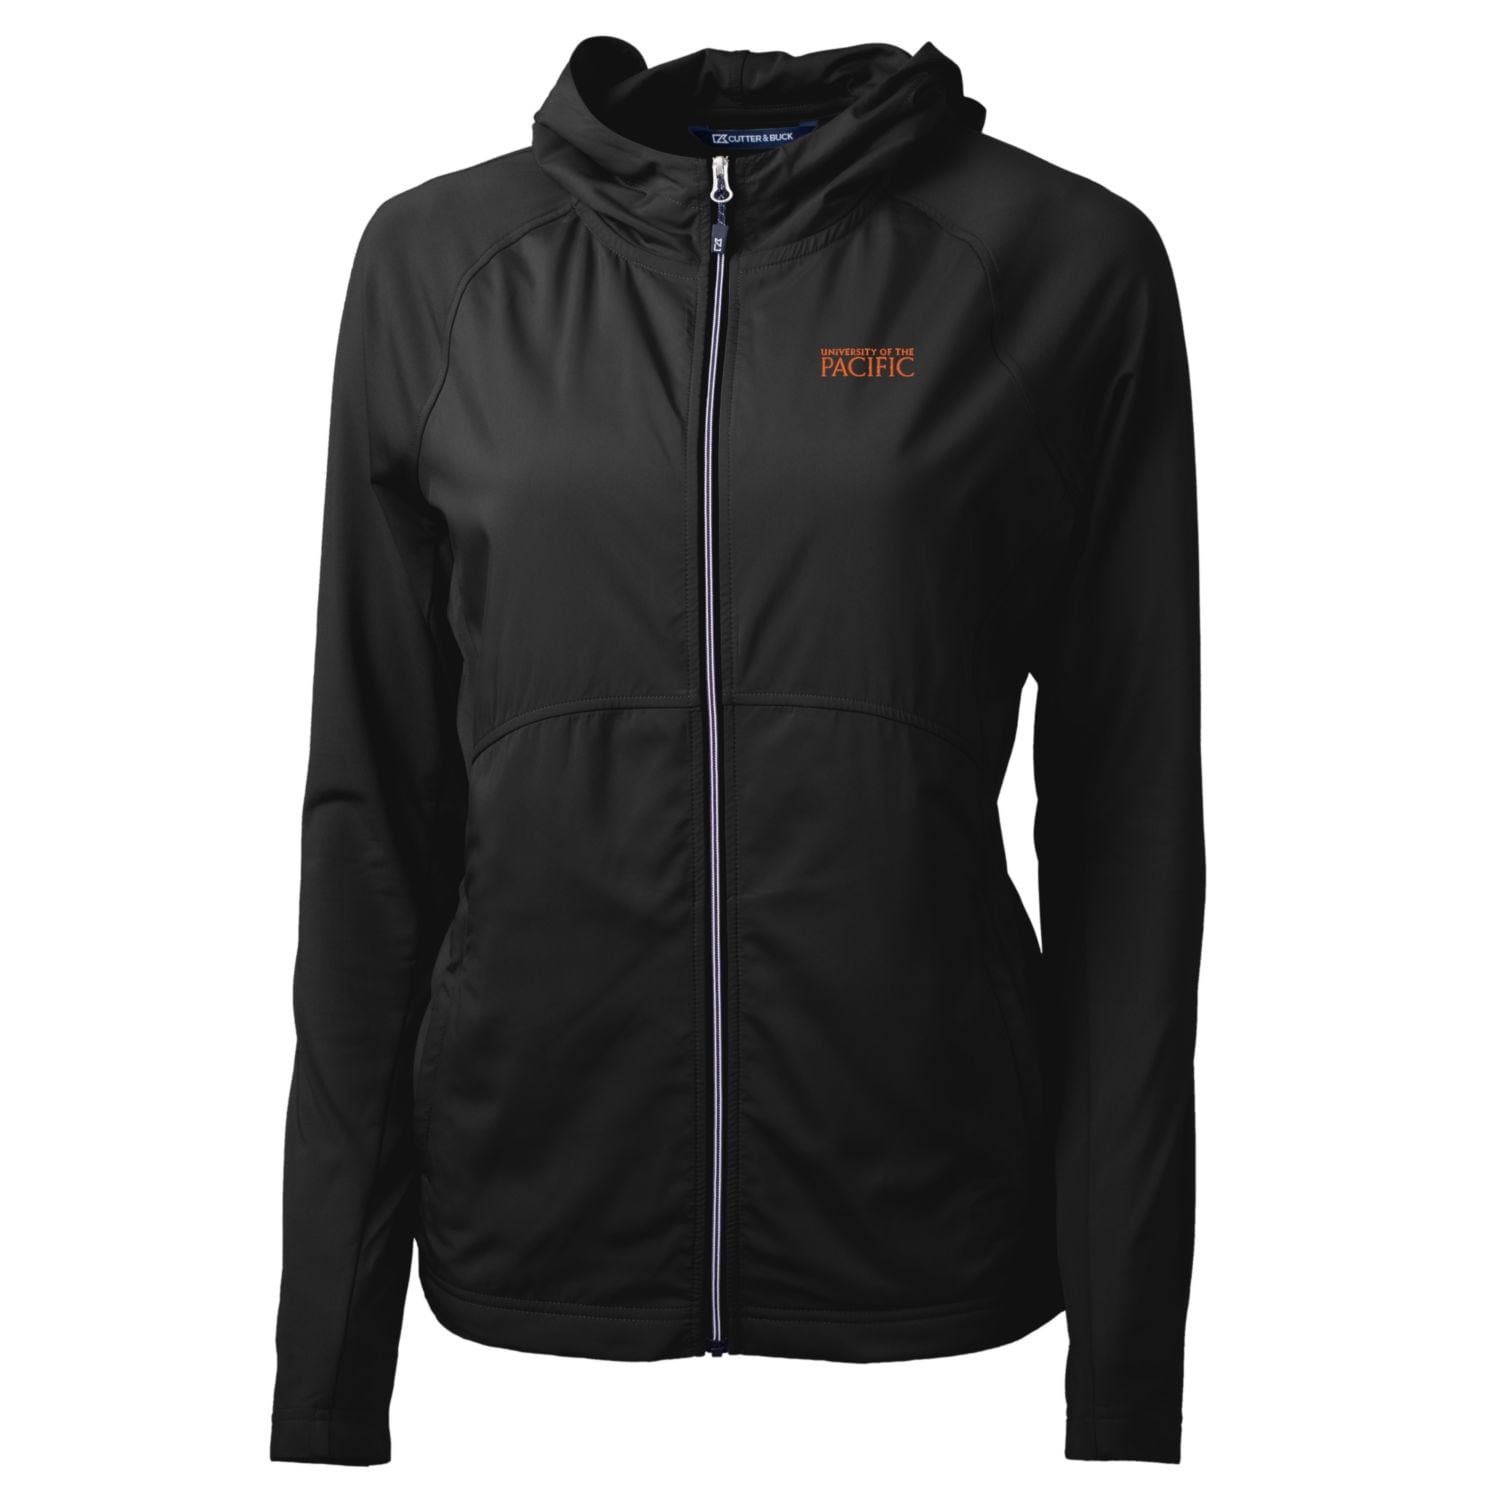 Women's Cutter & Buck Black Pacific Tigers Adapt Eco Knit Full-Zip Jacket - image 1 of 1